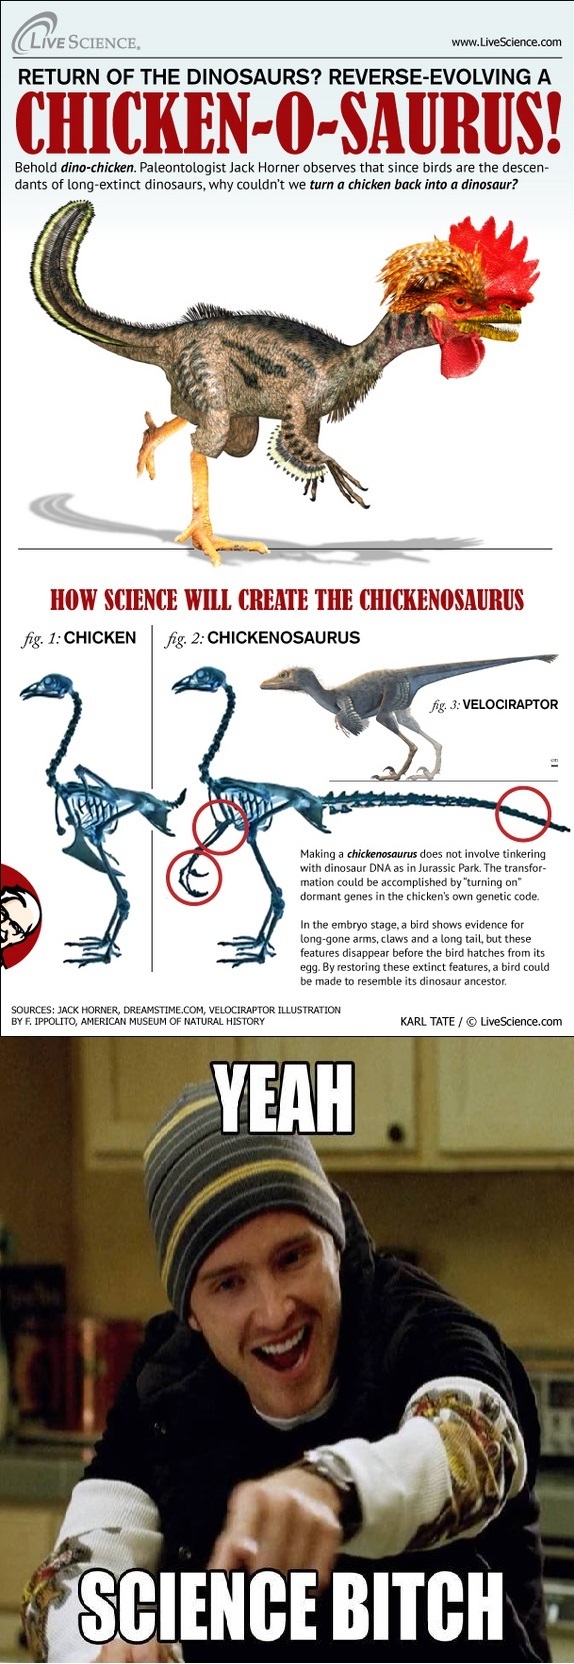 They Will Do What?-24 Best "Yeah Science Bitch" Memes Ever Made